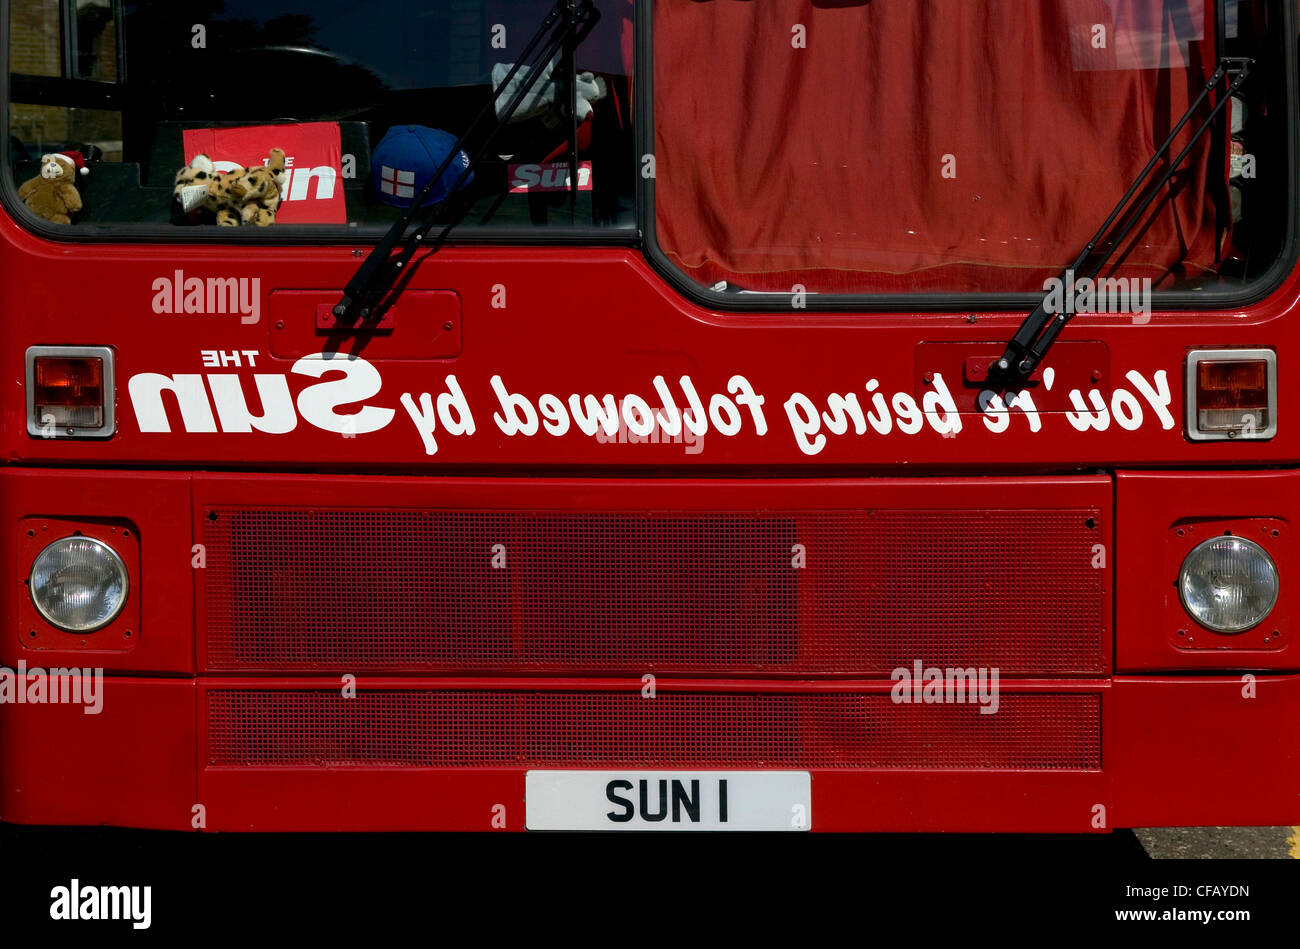 Red London Bus with the Sun newspaper advertised on the front. Stock Photo